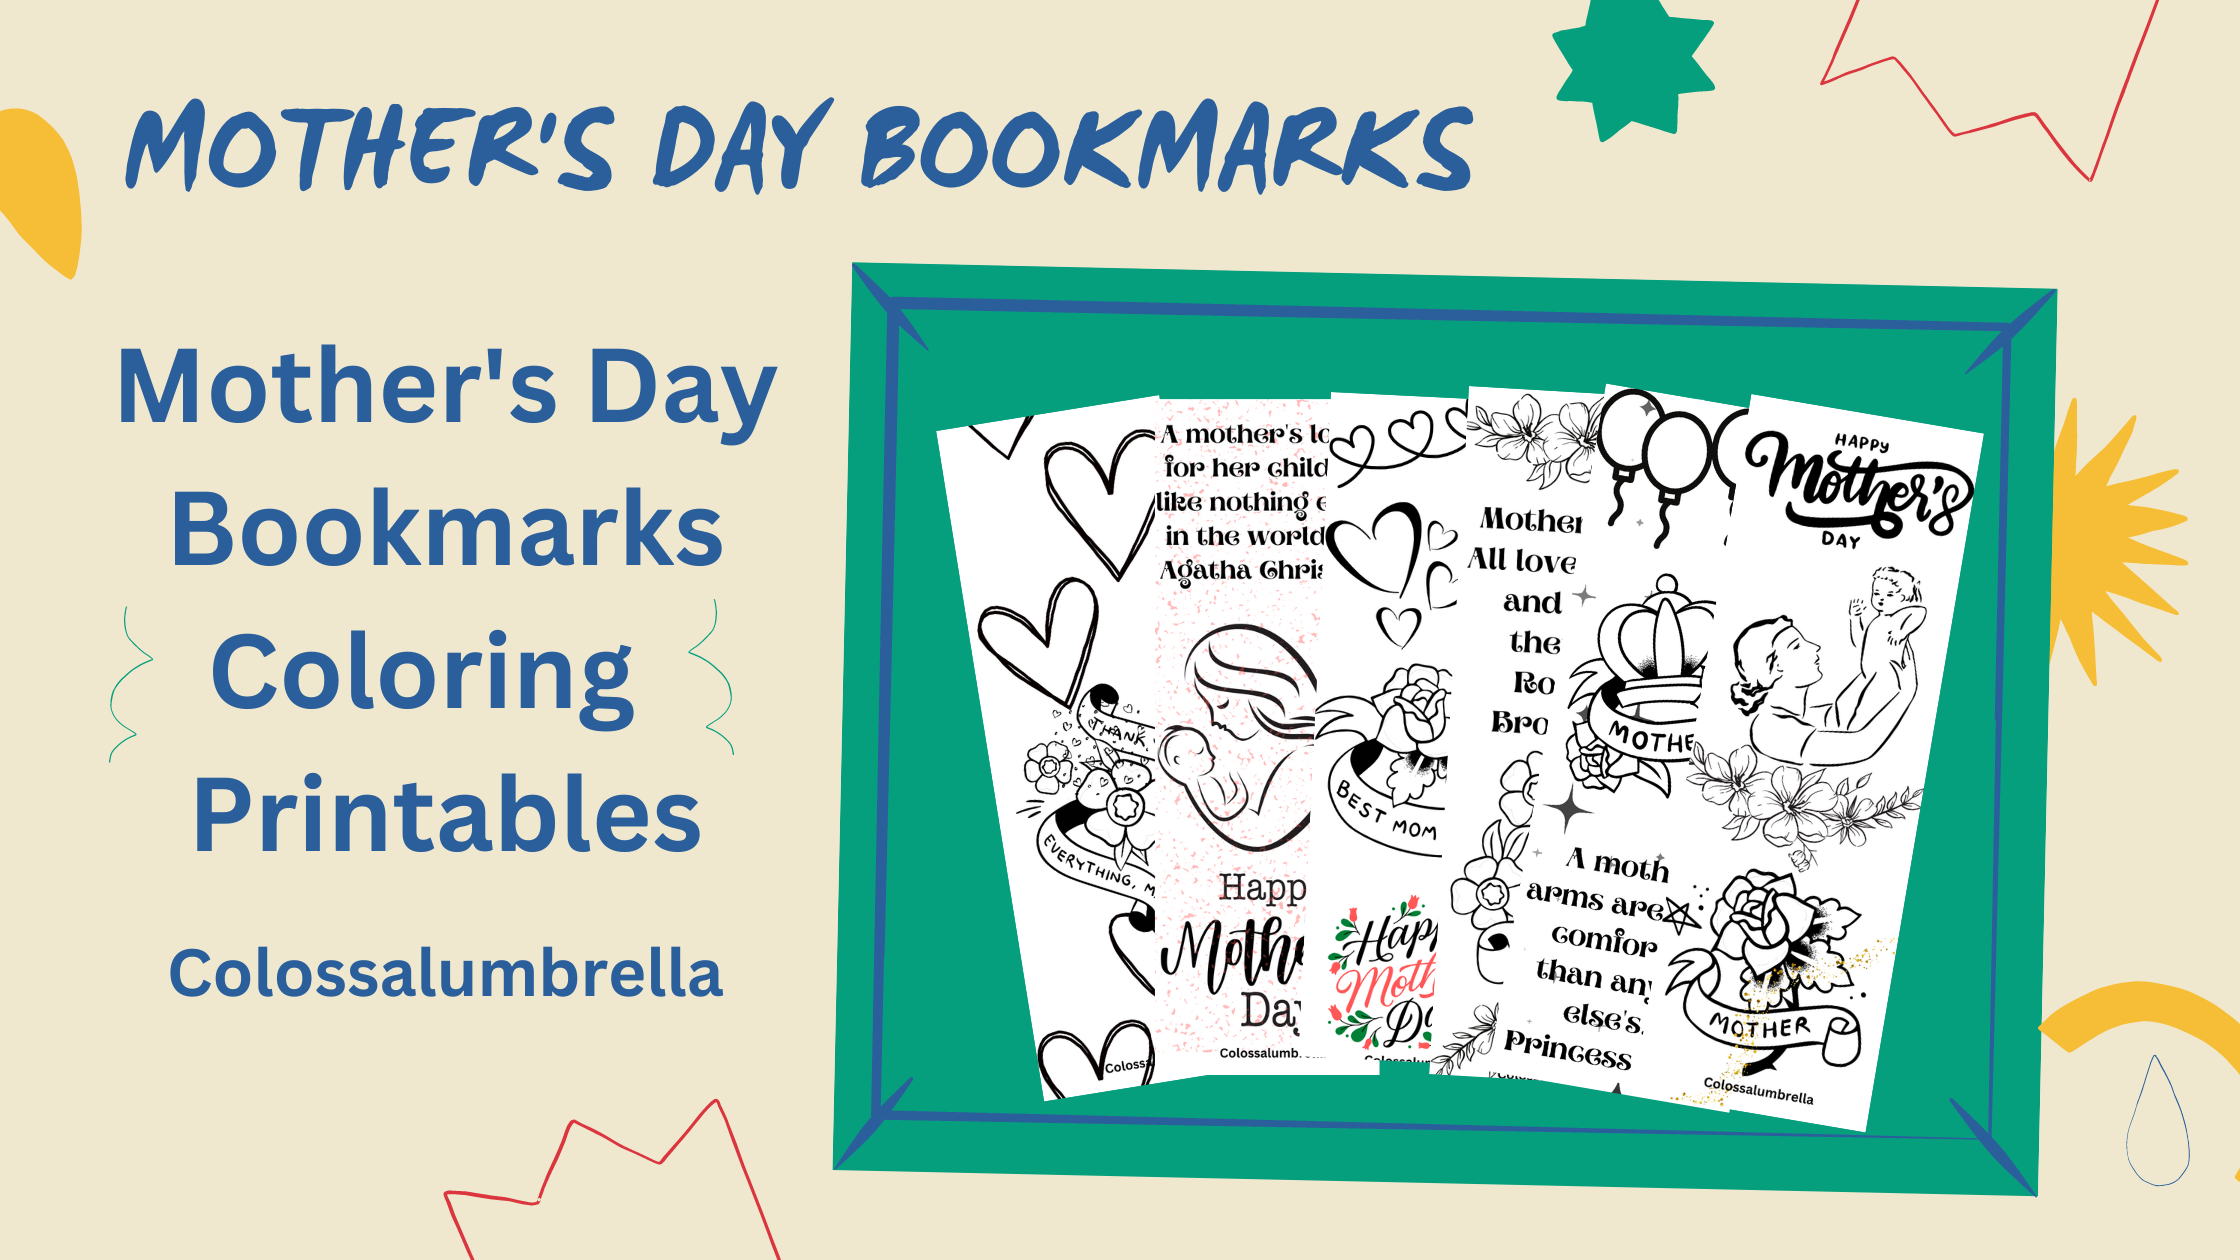 Mothers Day bookmarks